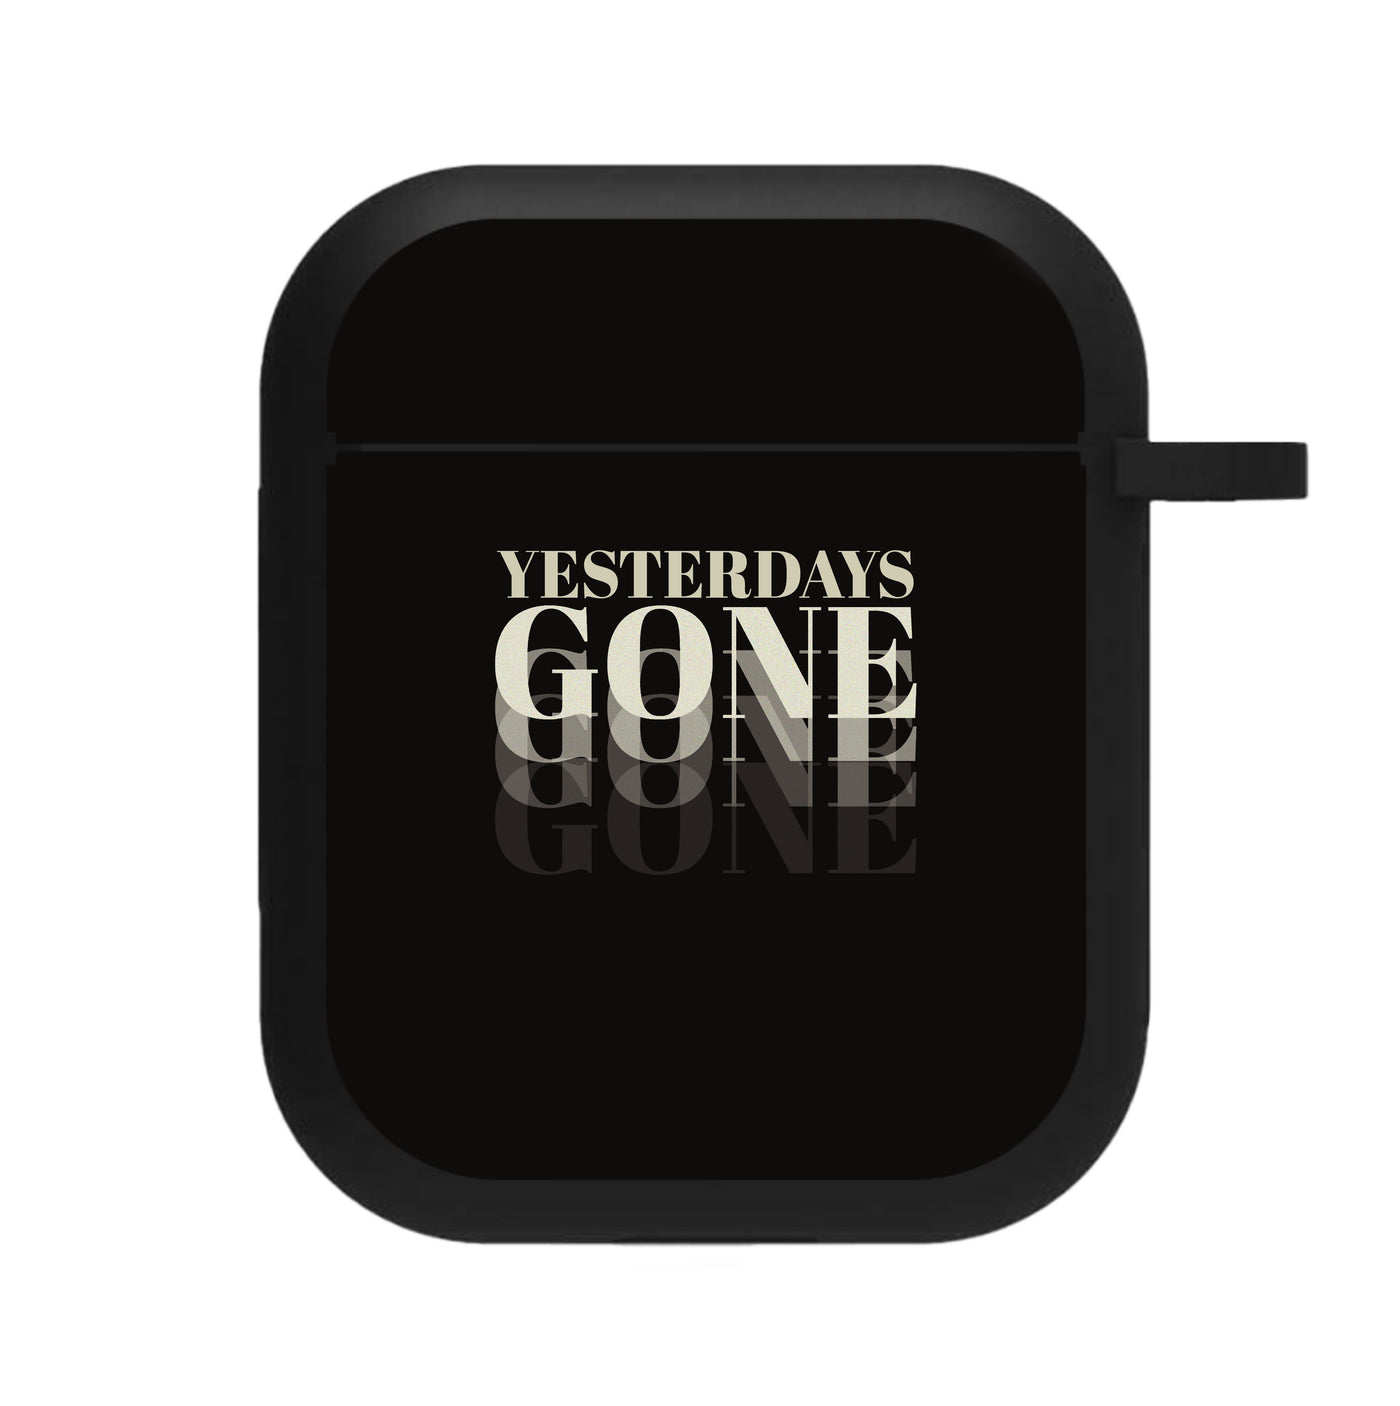 Yesterdays Gone - Loyle Carner AirPods Case